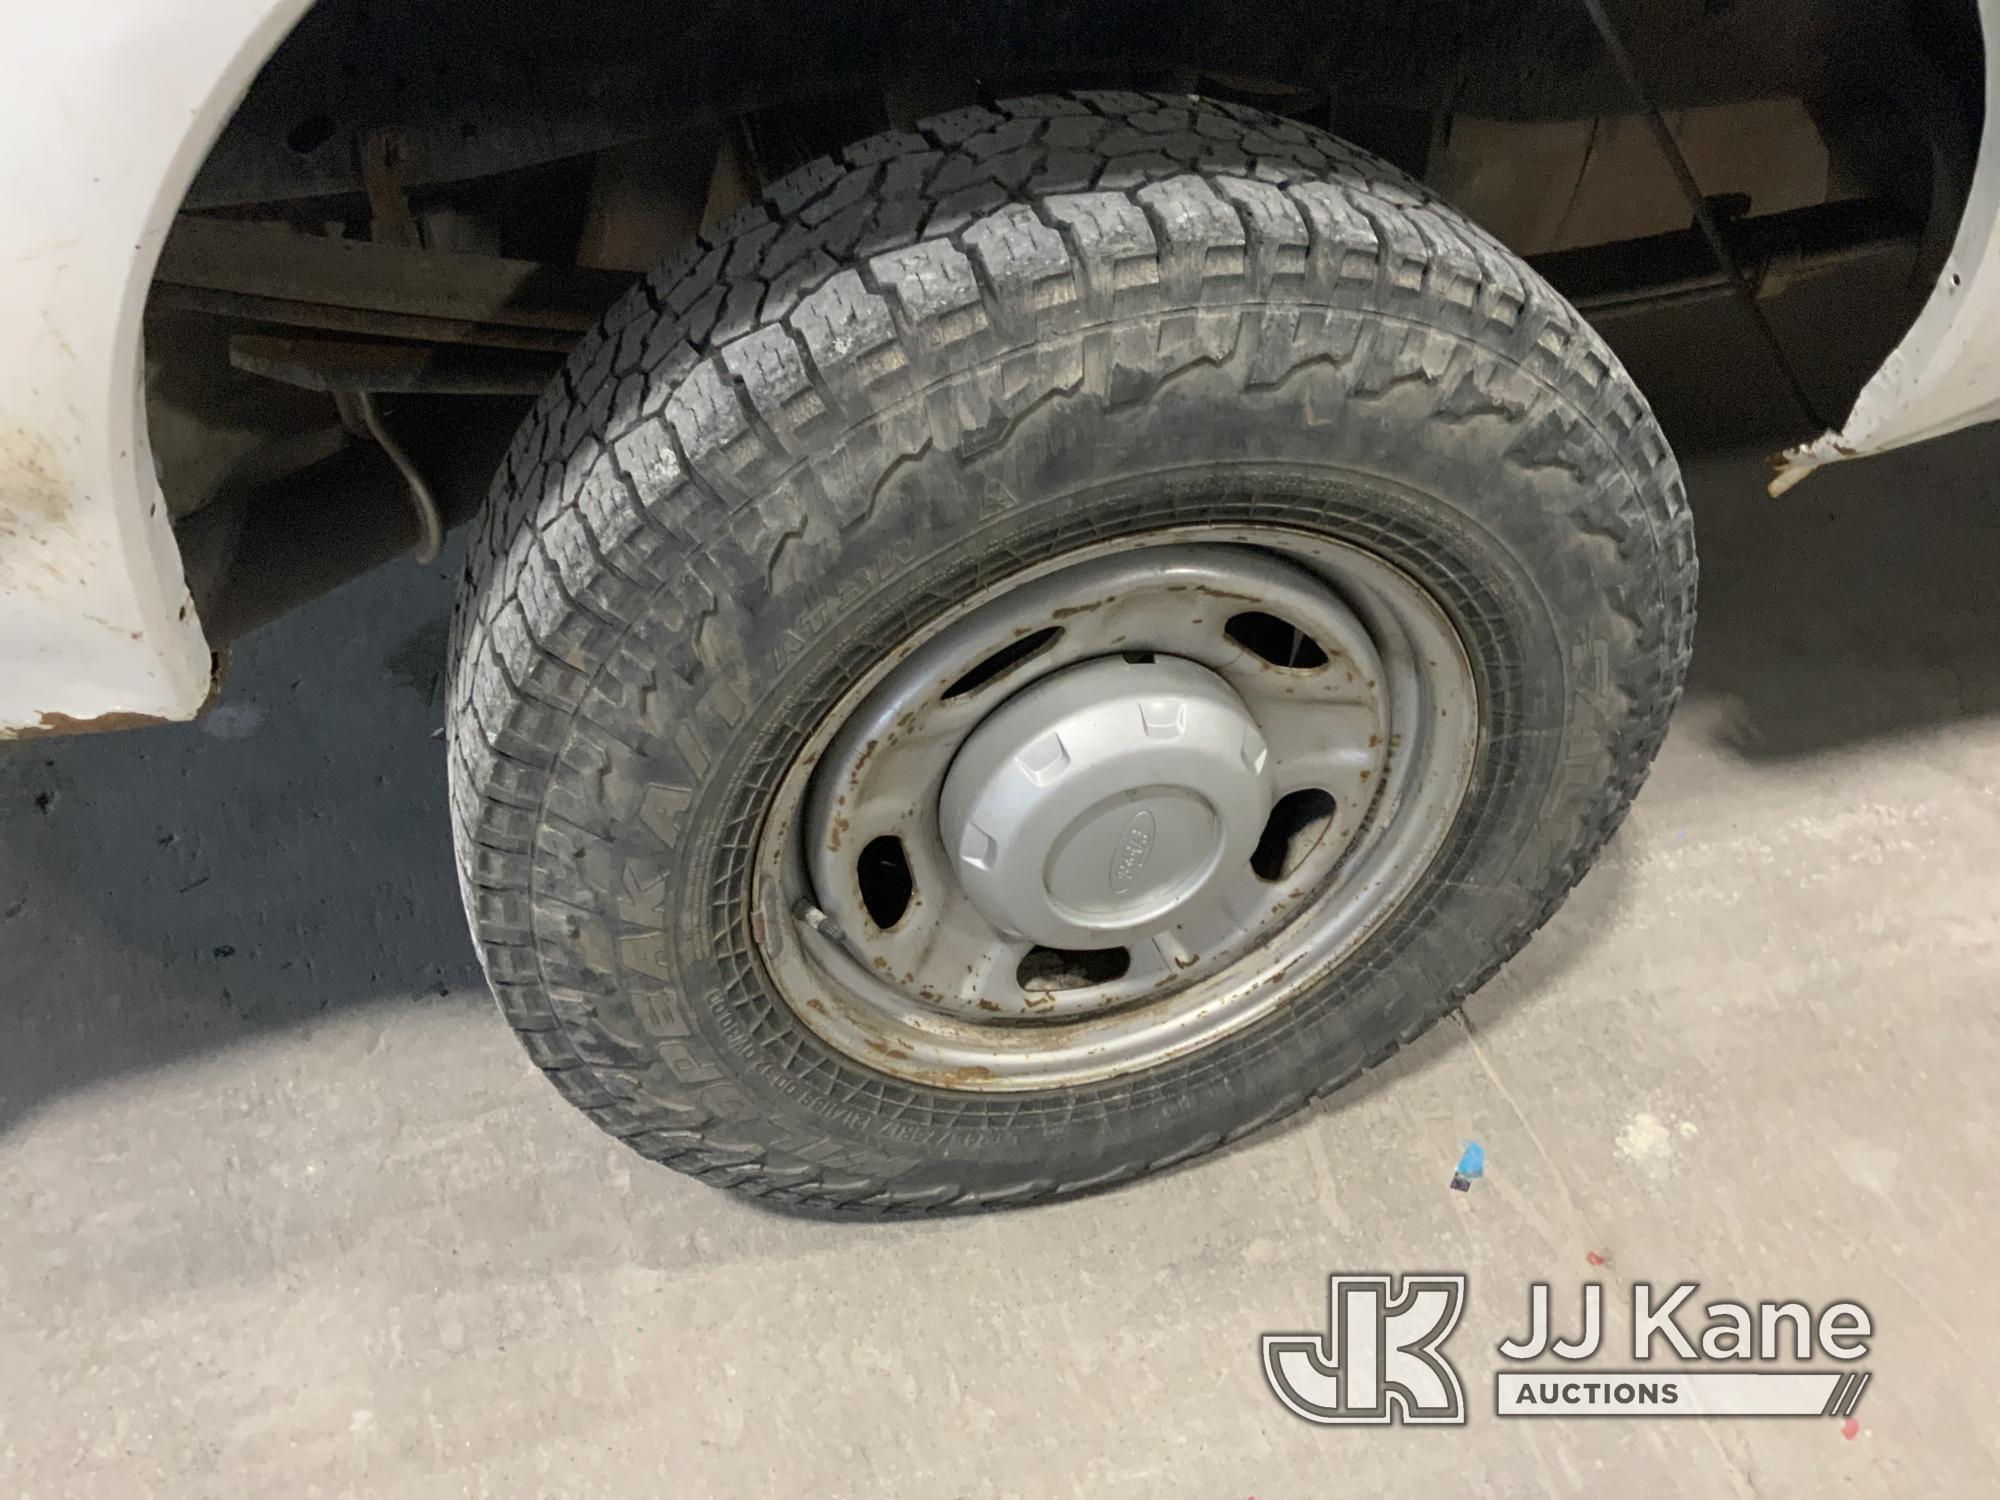 (Fort Wayne, IN) 2014 Ford F250 4x4 Crew-Cab Pickup Truck Runs & Moves) (Engine Noise, Body Damage,